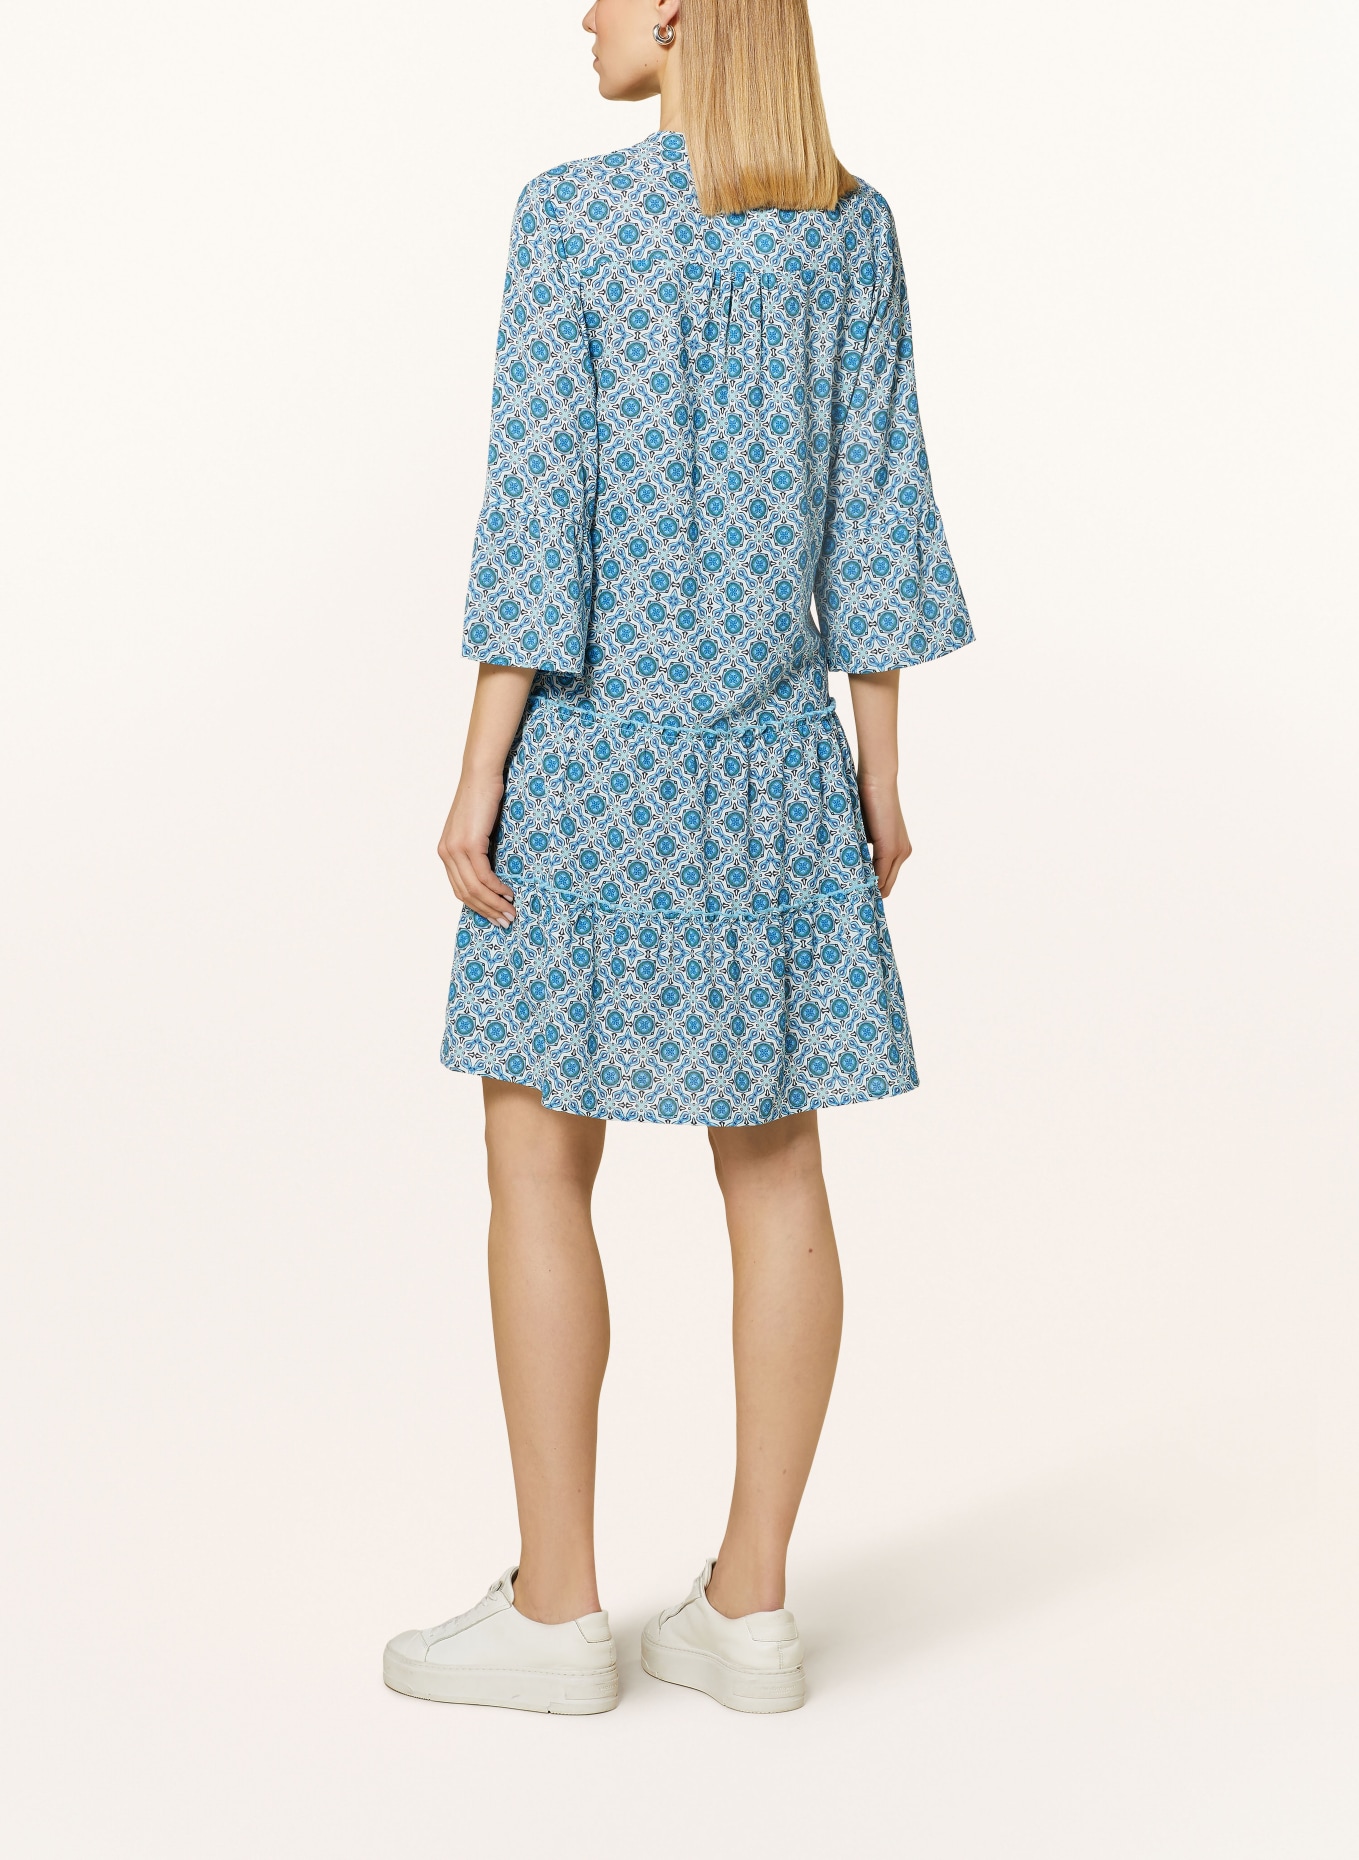 CARTOON Dress with 3/4 sleeve and frills, Color: BLUE/ LIGHT BLUE (Image 3)